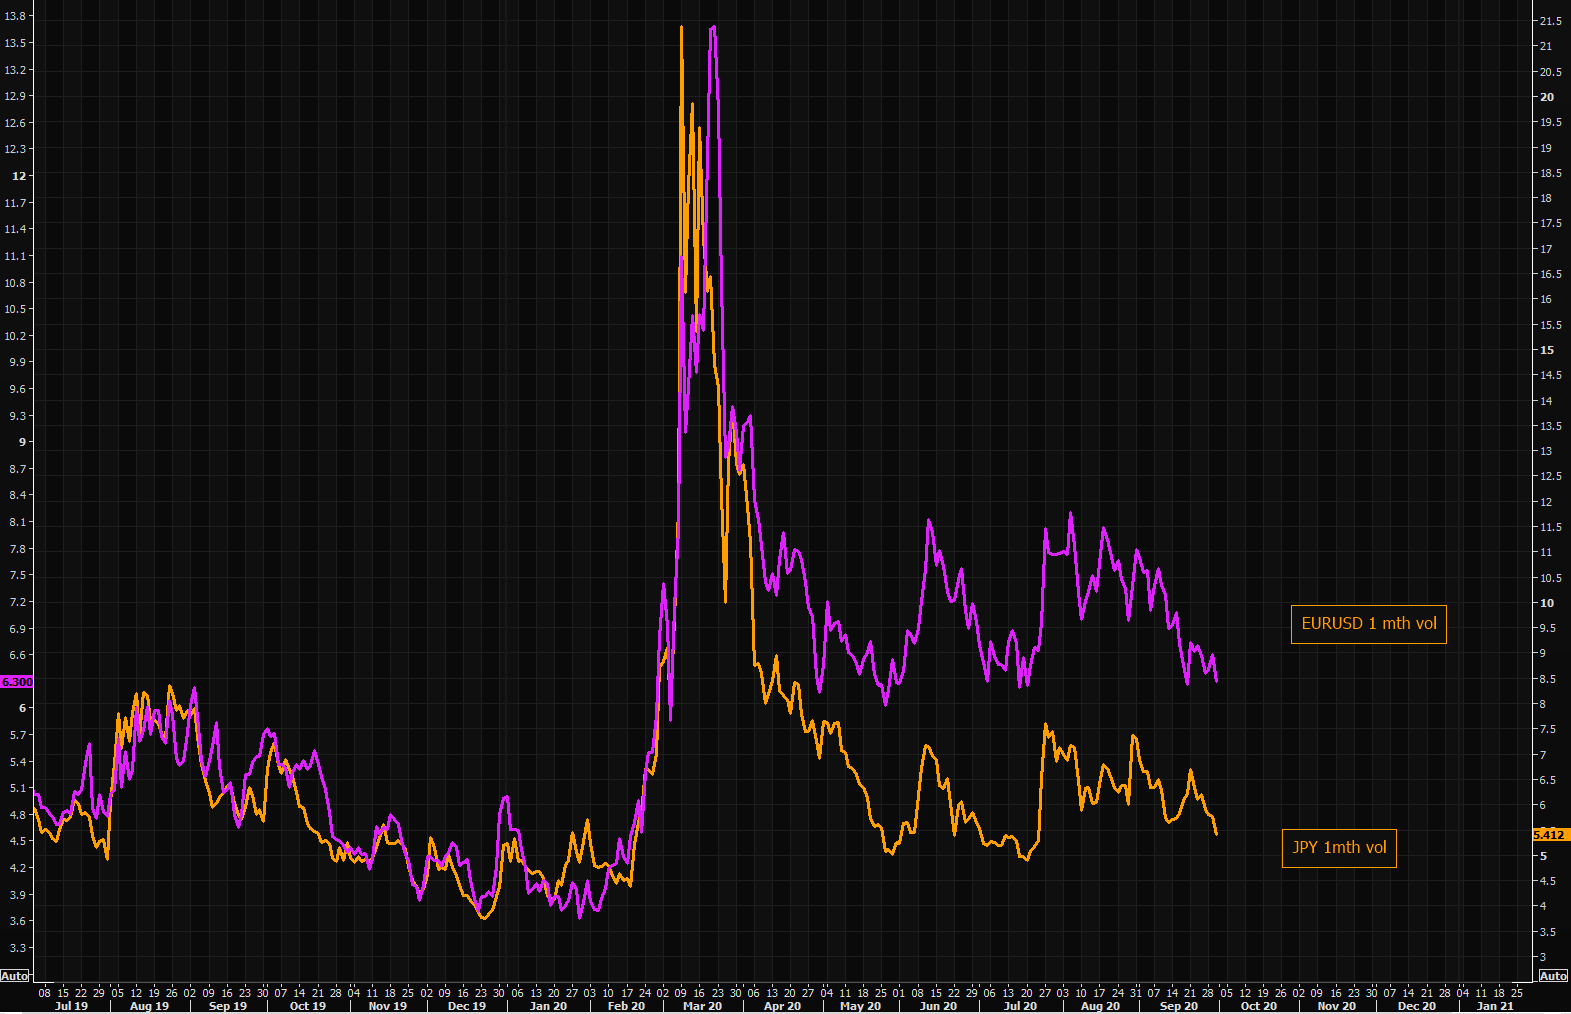 Big FX vols at or taking new recent lows